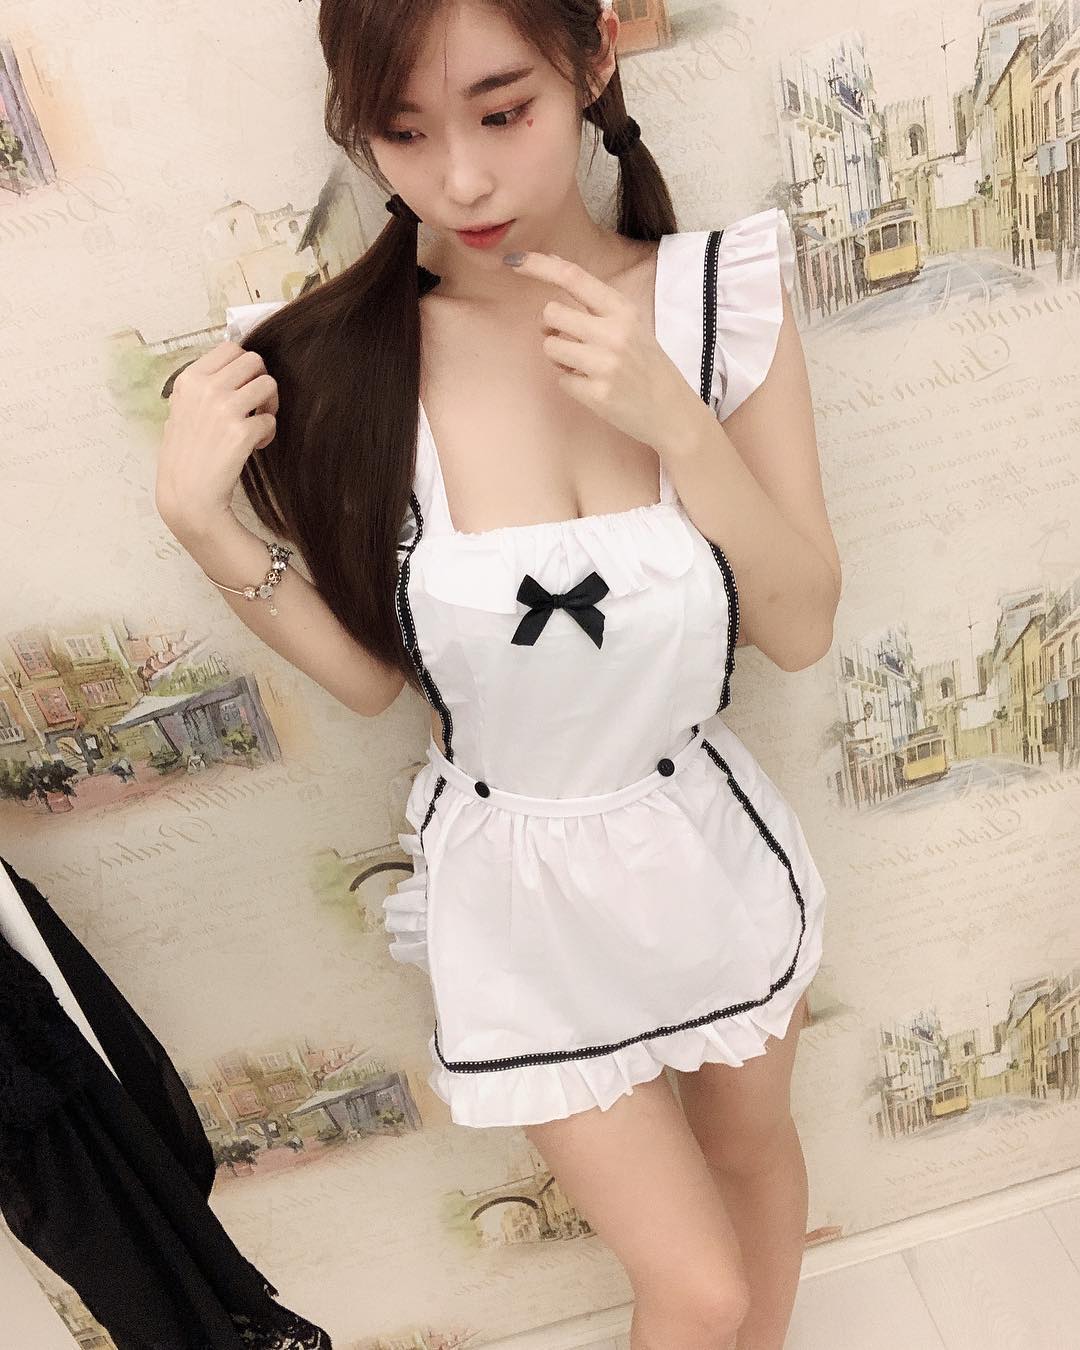 Lai Wei Betty is showing off her petite tight body for you in this sexy maid cosplay